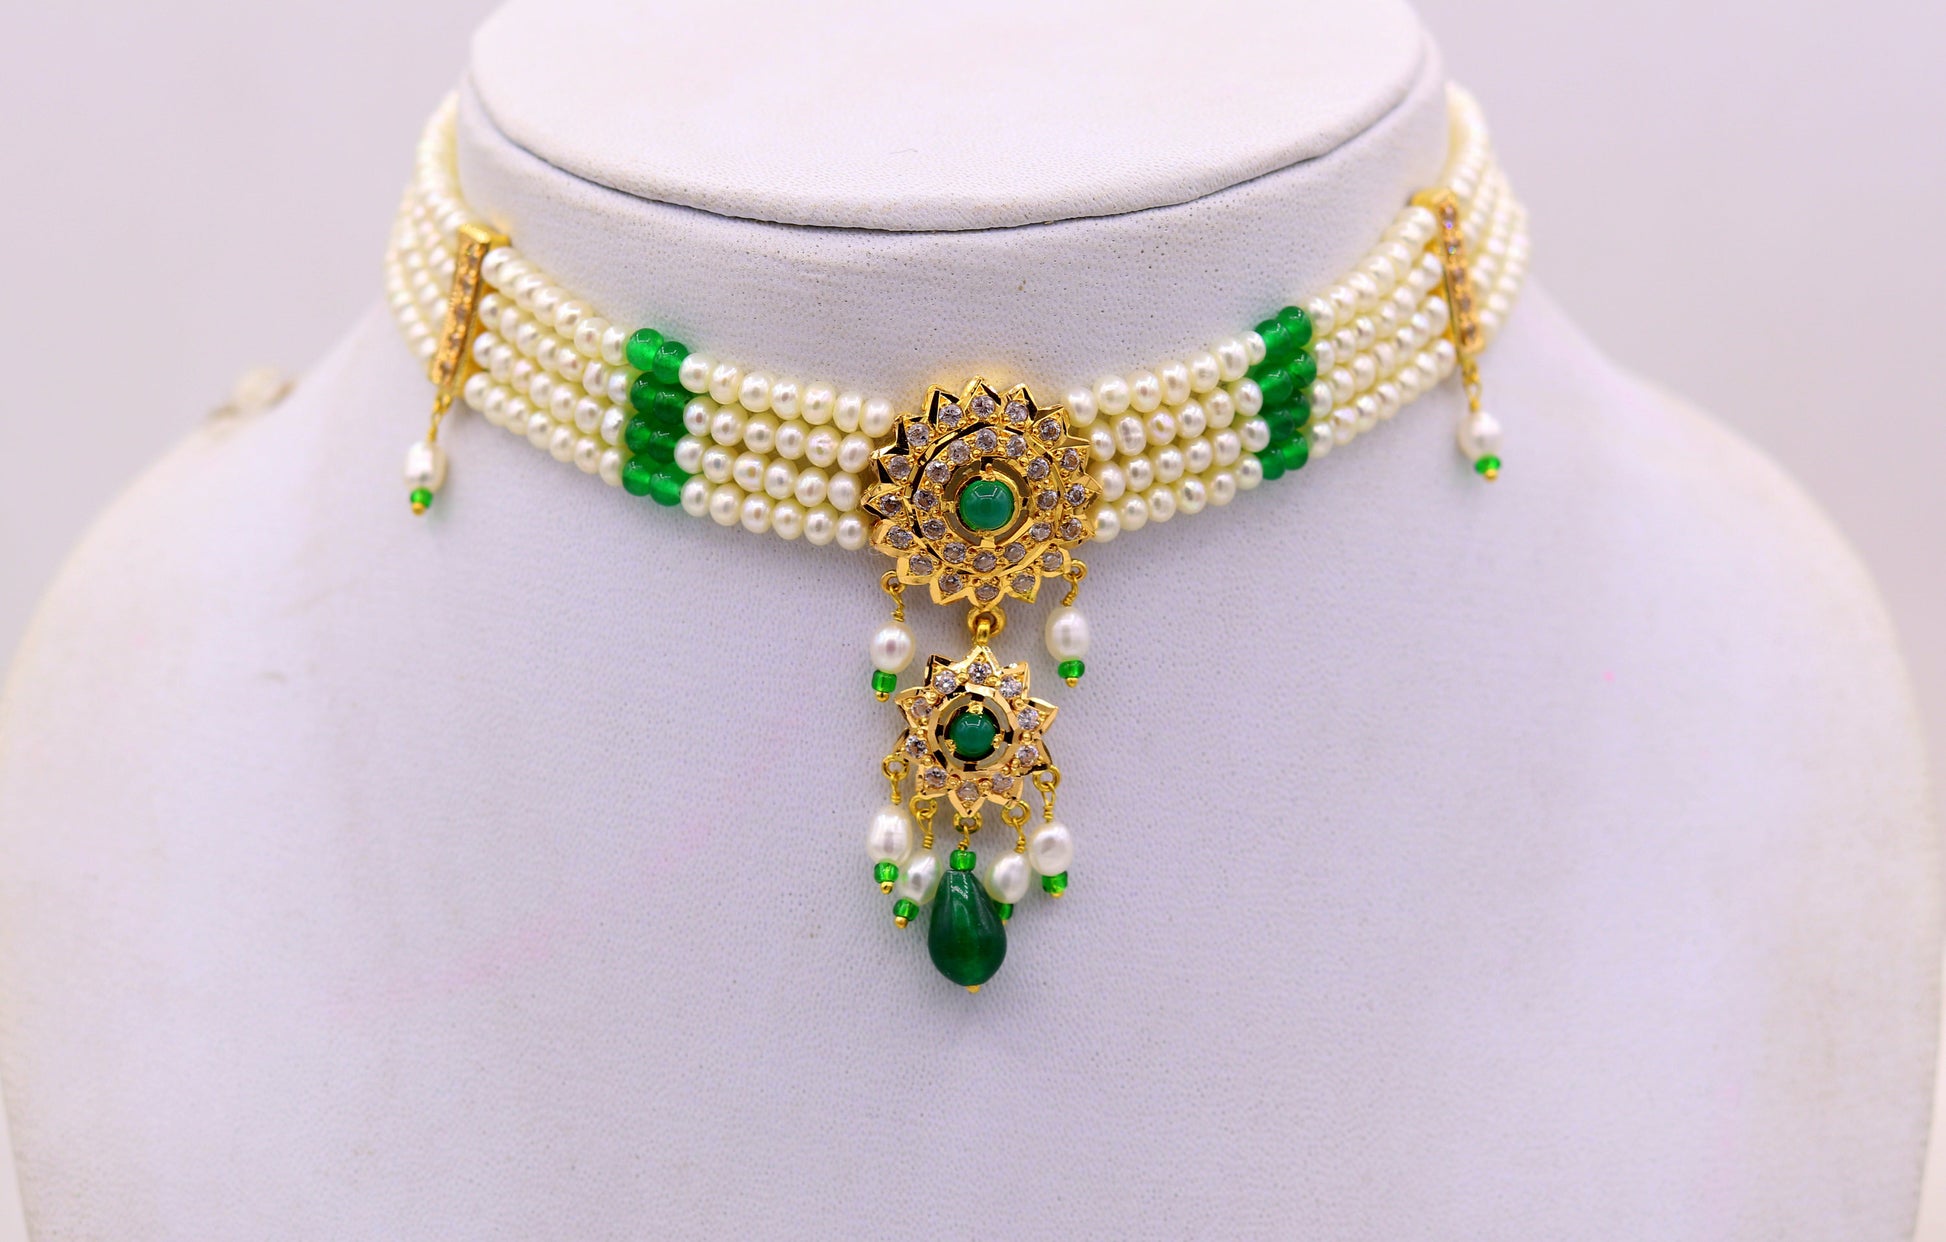 Vintage handmade 22karat yellow gold punjabi necklace with earrings, Fabulous green stone pearl necklace set wedding jewelry - TRIBAL ORNAMENTS